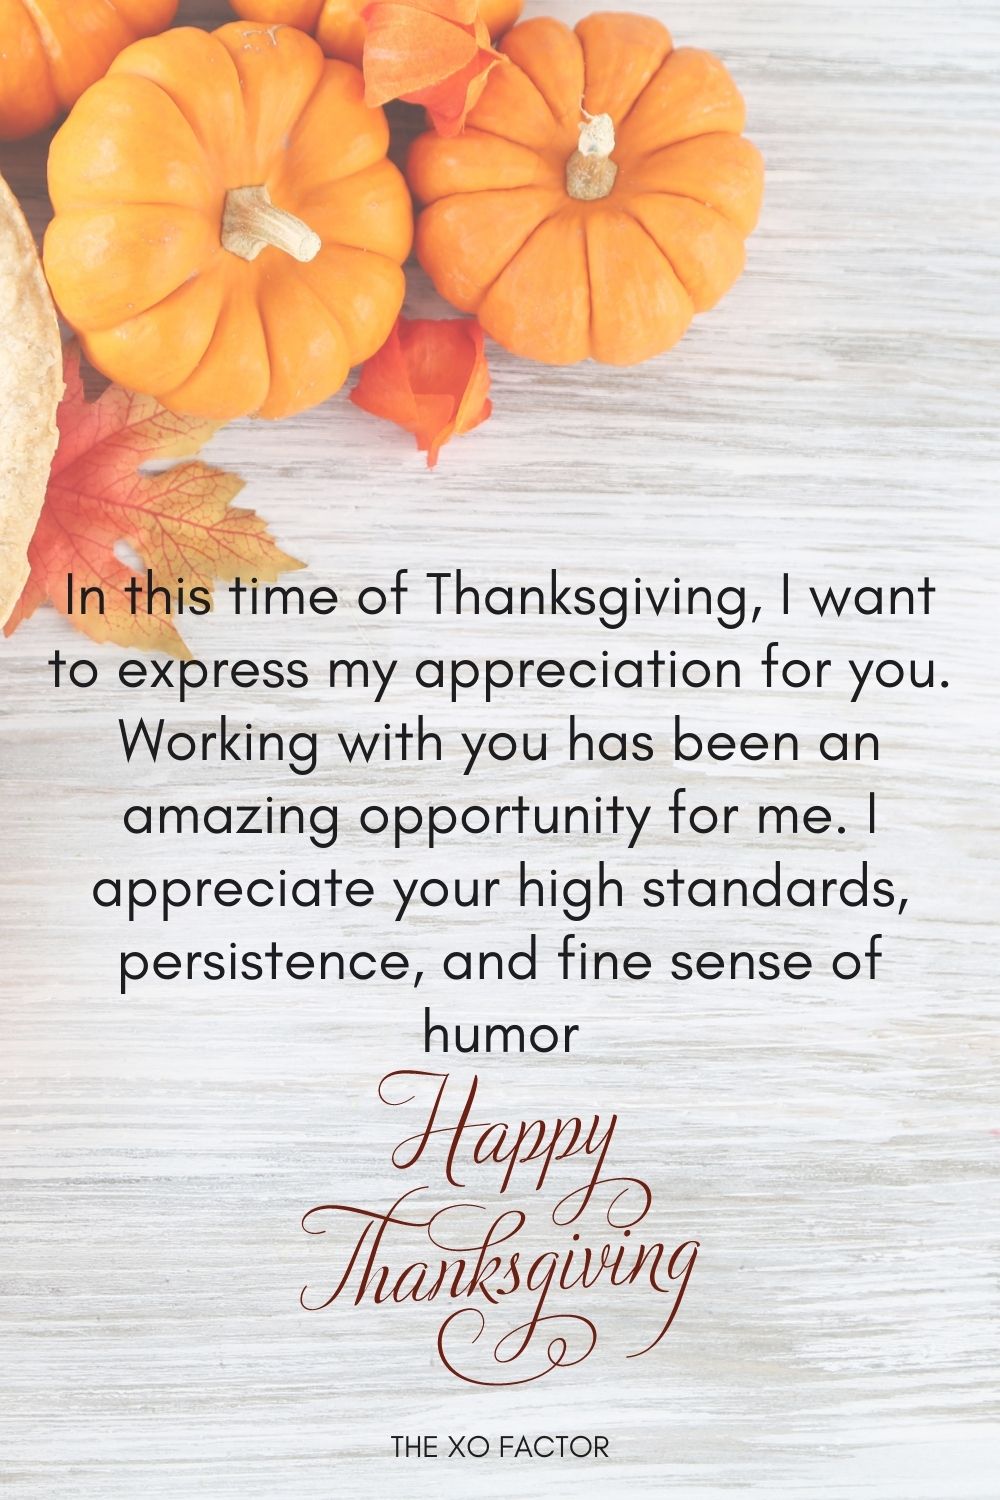 In this time of Thanksgiving, I want to express my appreciation for you. Working with you has been an amazing opportunity for me. I appreciate your high standards, persistence, and fine sense of humor. Happy Thanksgiving.